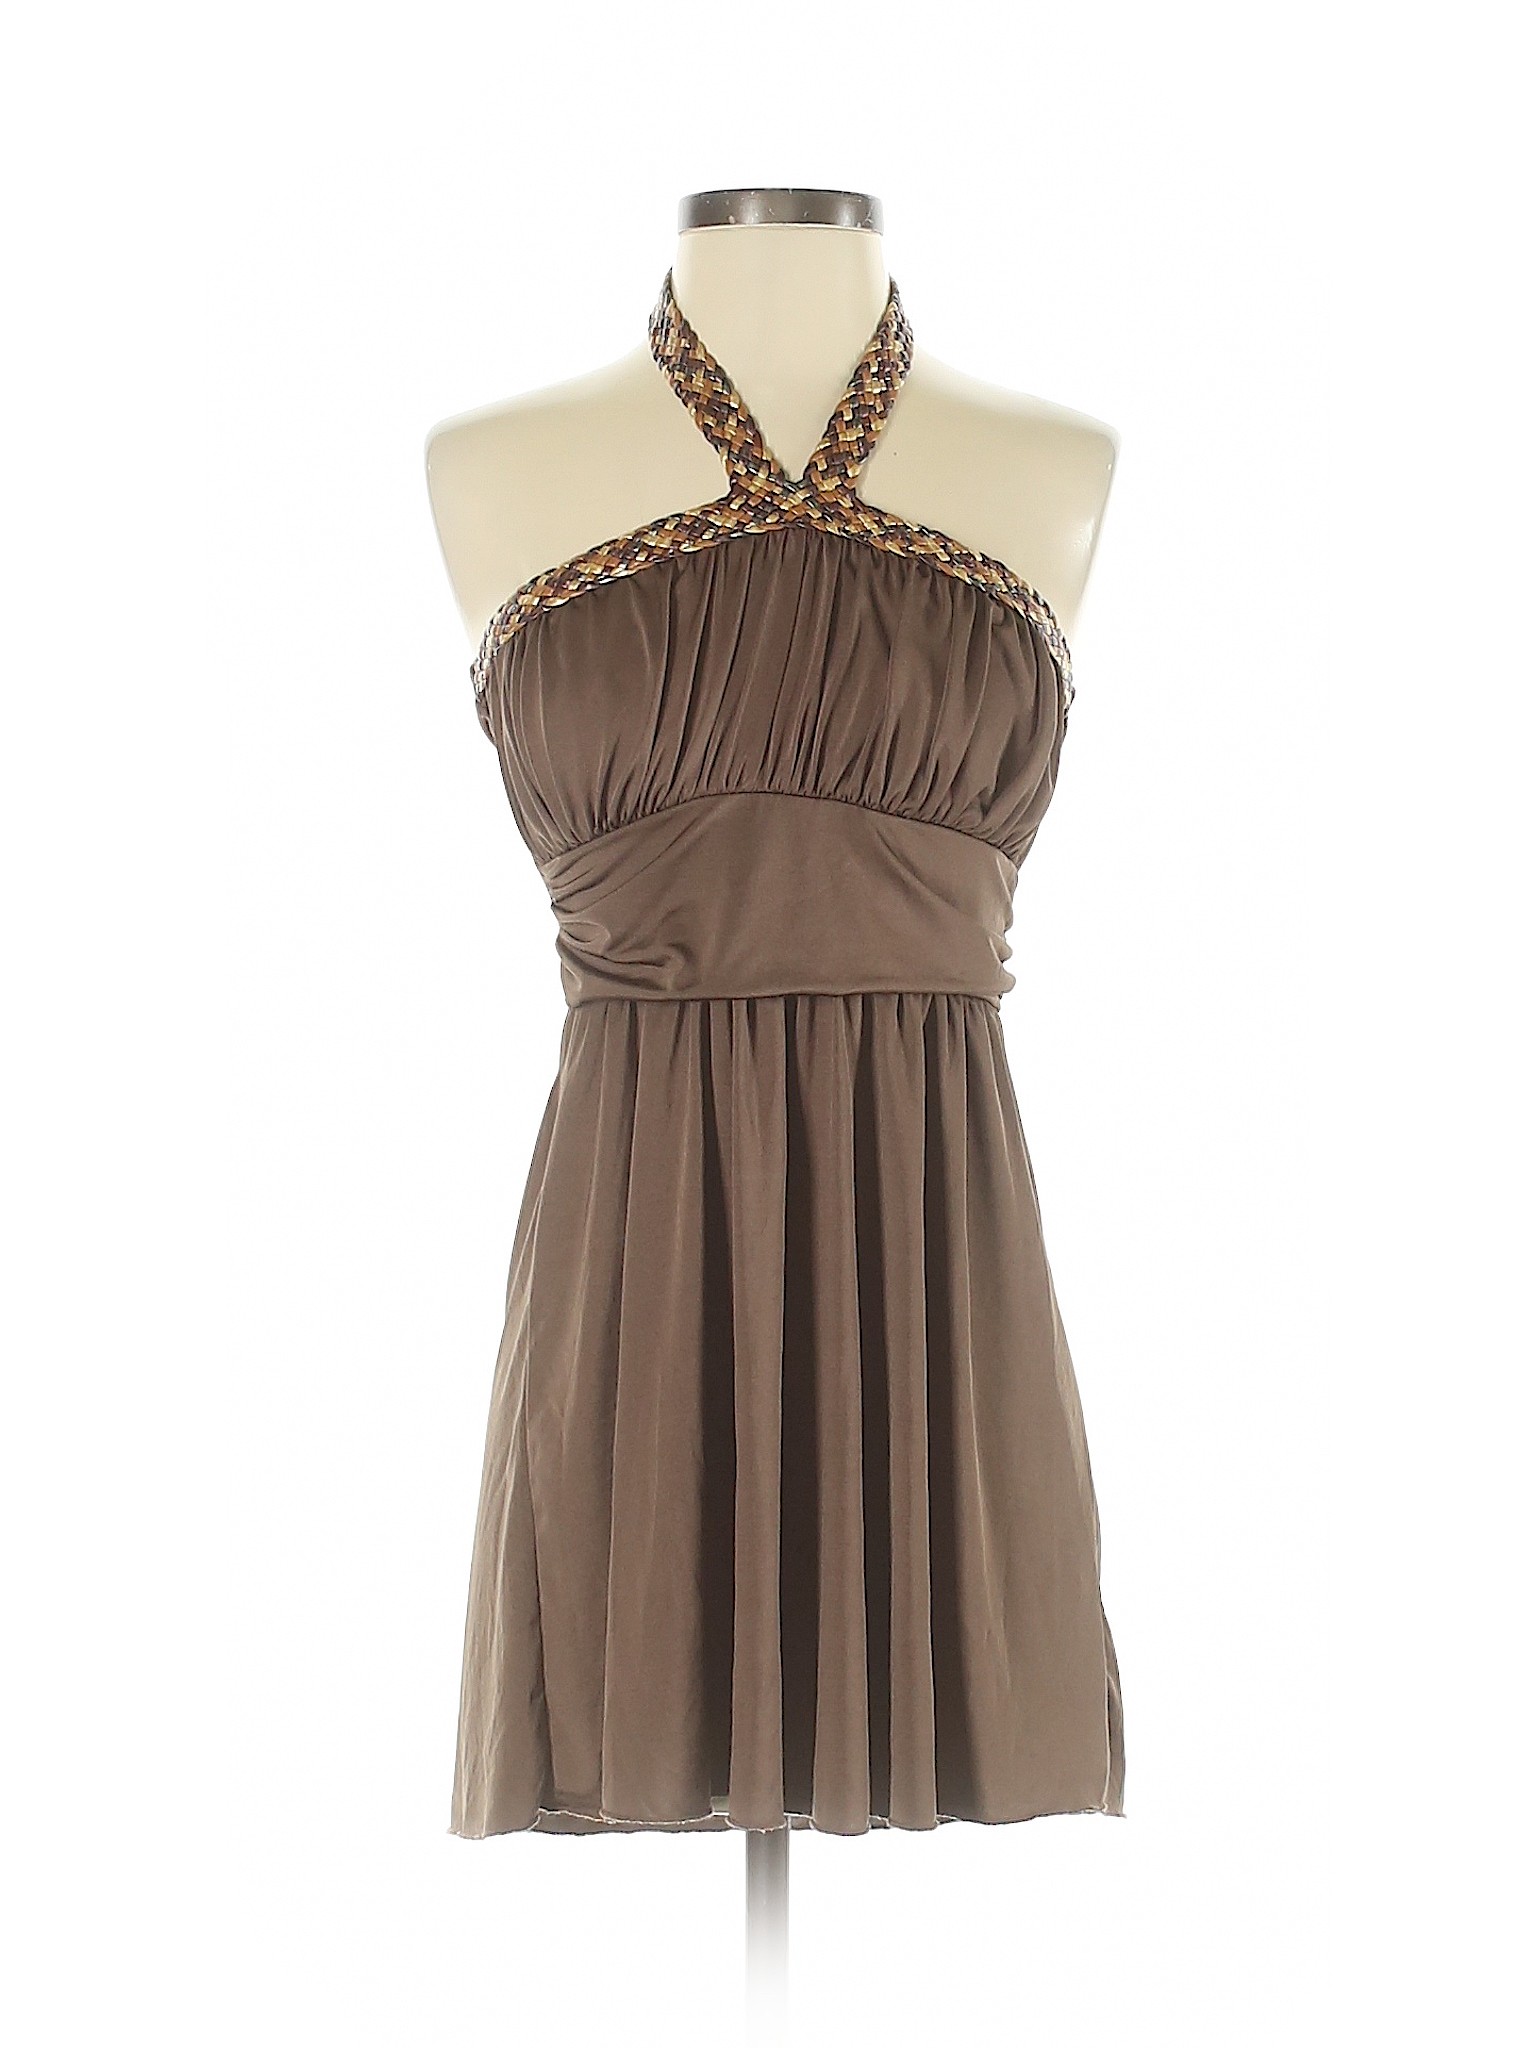 Body Central Solid Metallic Brown Cocktail Dress Size S 70 Off Thredup